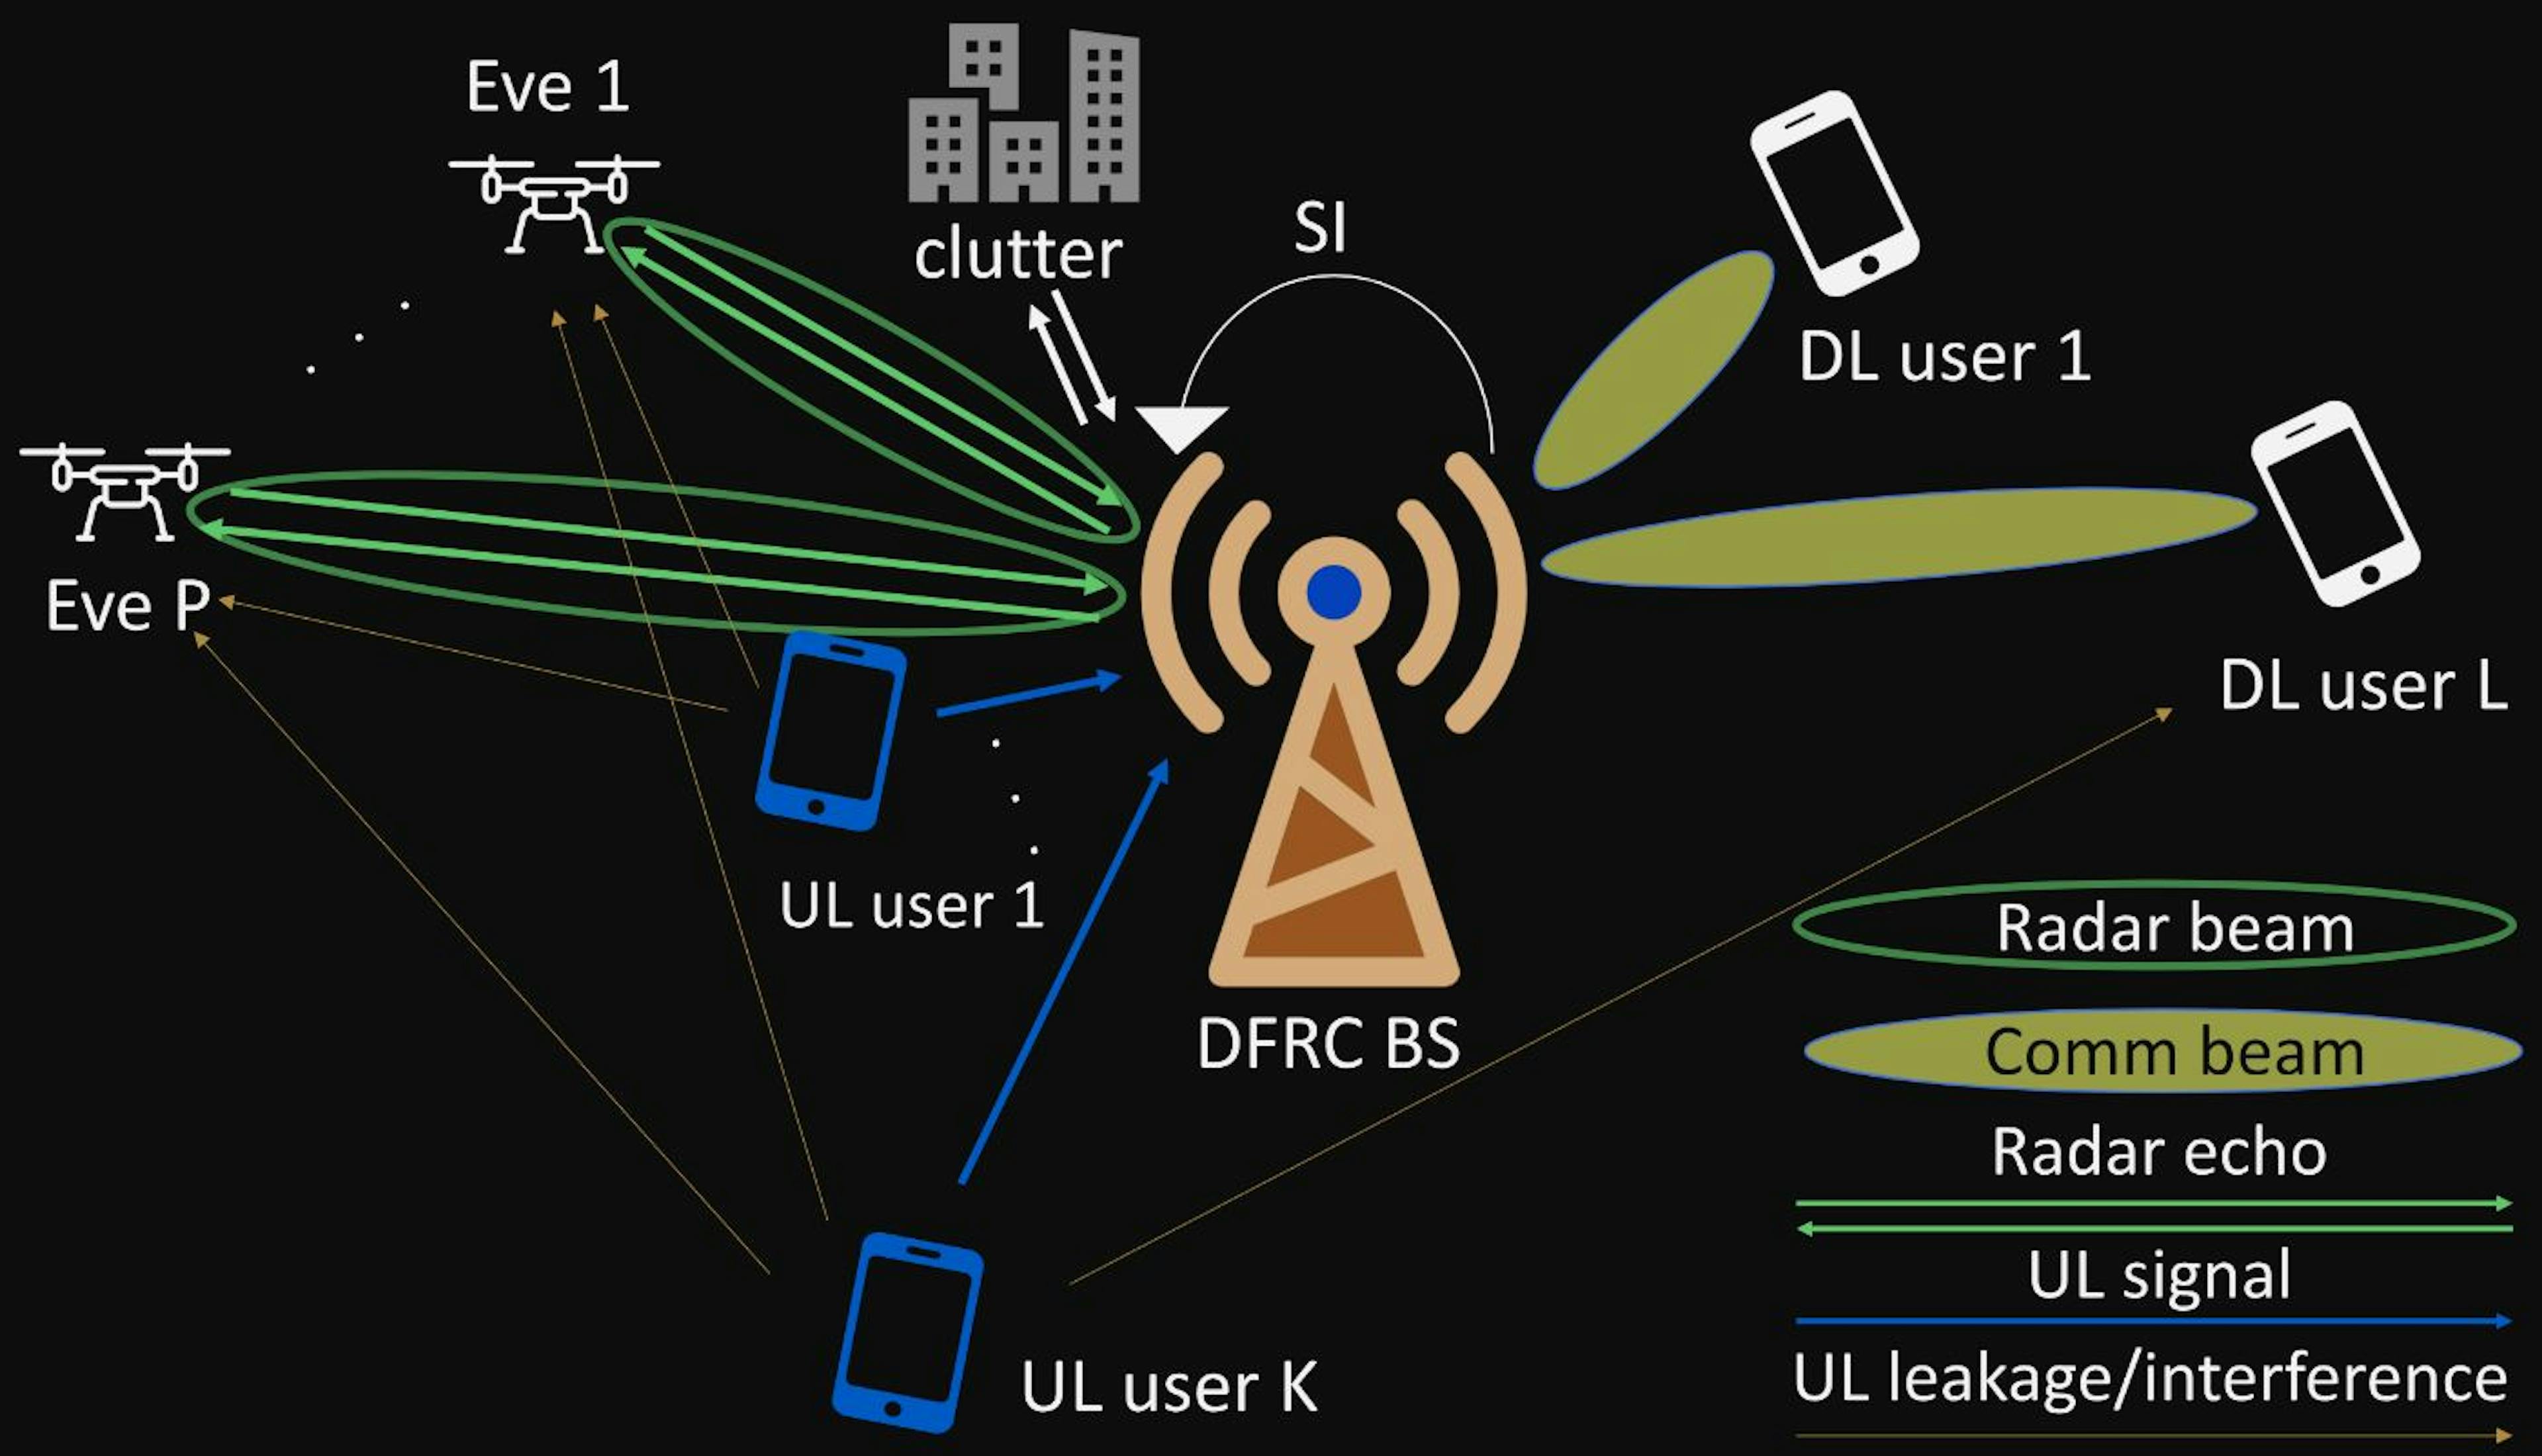 A practical ISAC scenario operating in a full duplex, in the presence of multiple maliciouseavesdroppers intending to wiretap on uplink/downlink communications between